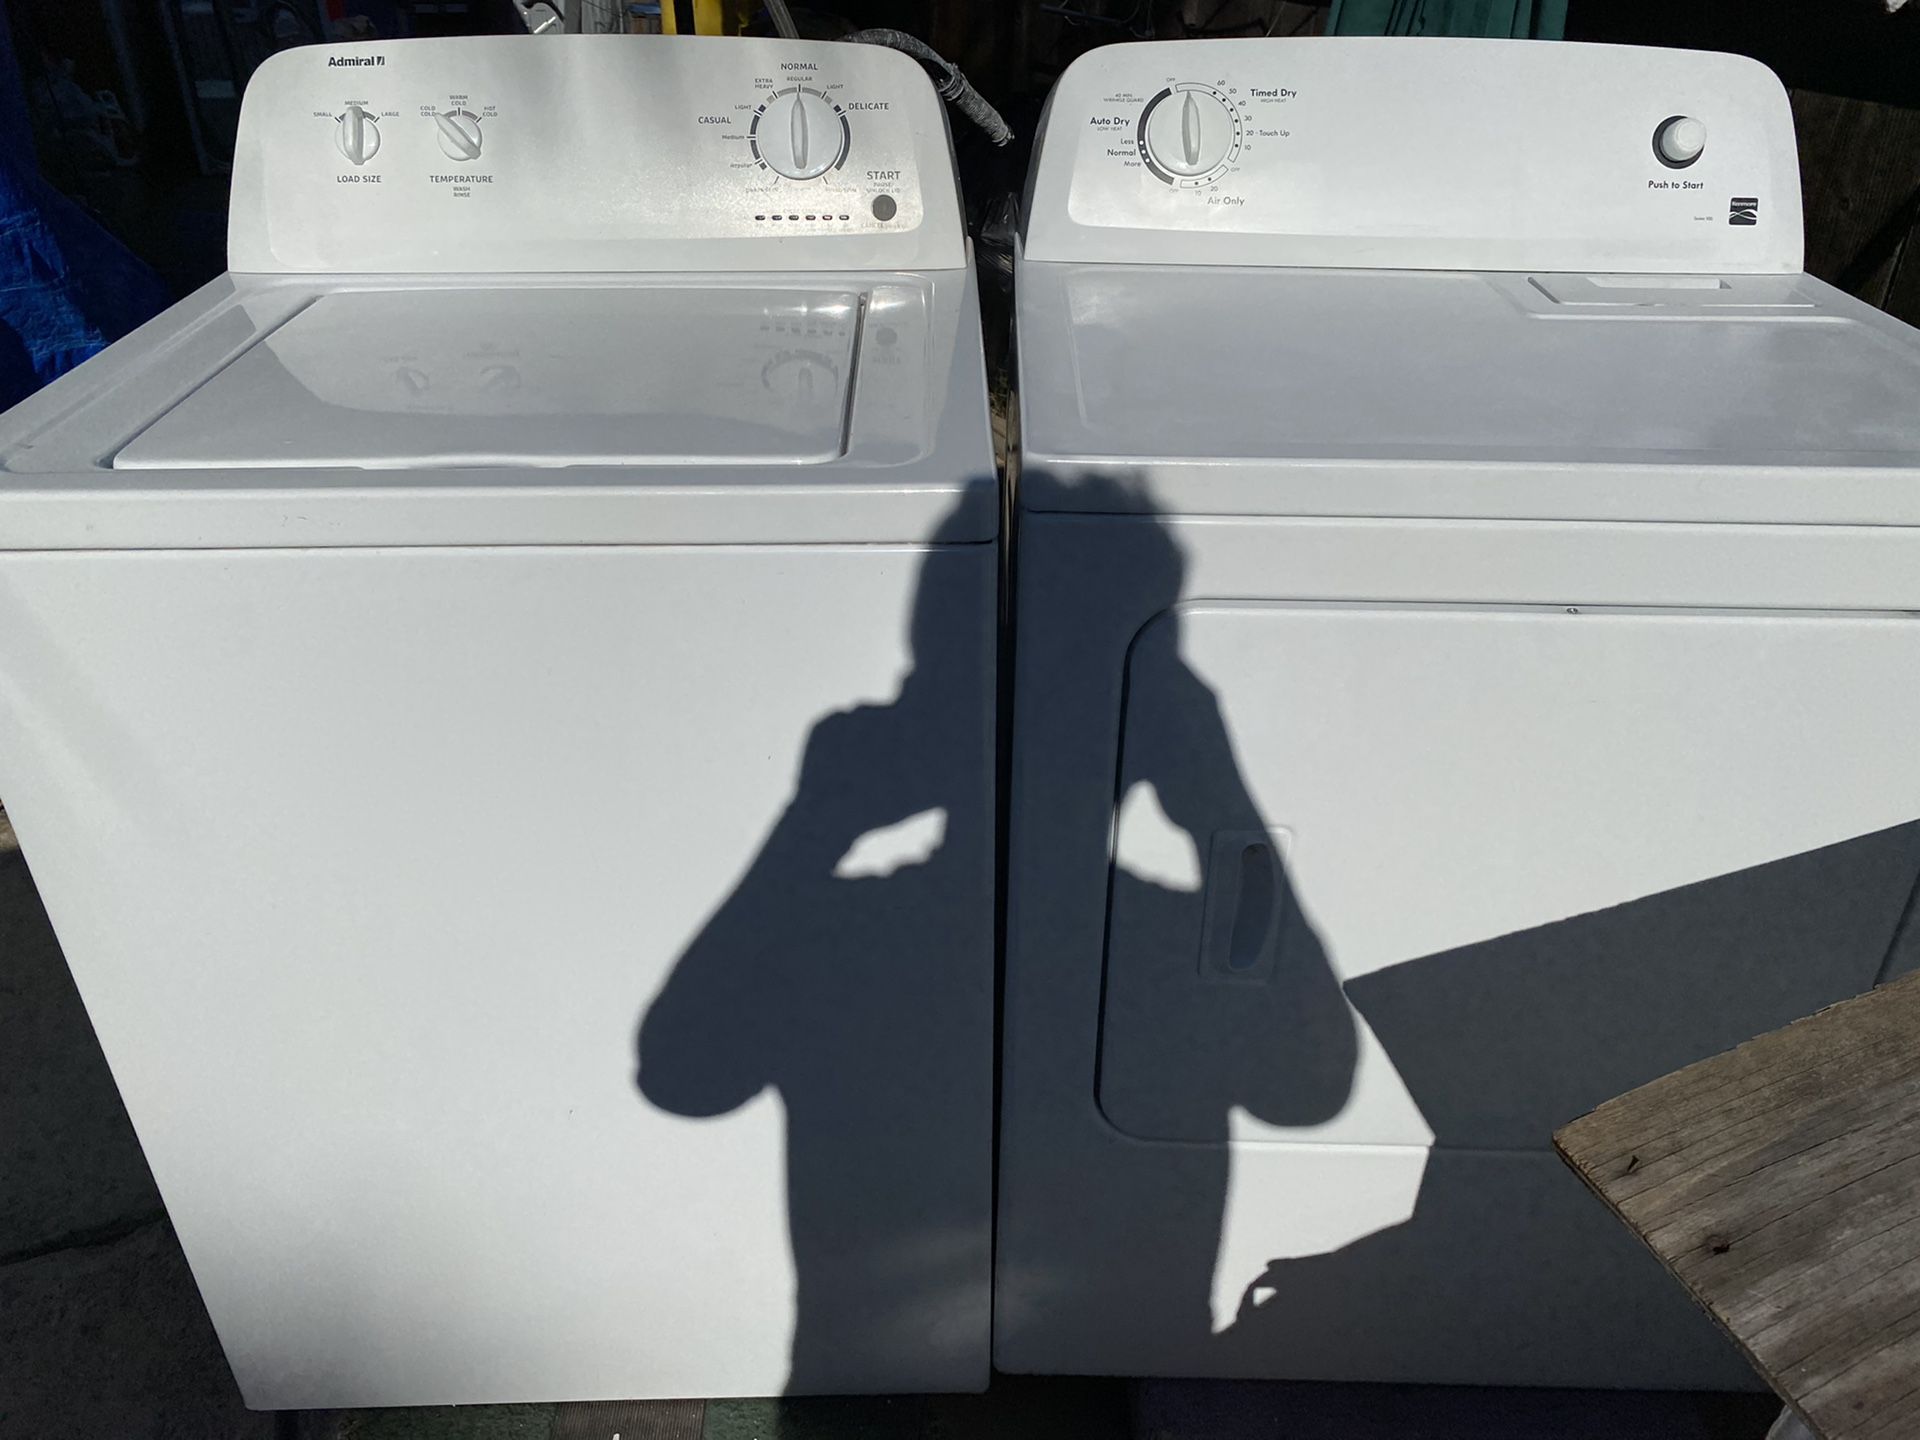 Kenmore admiral washer and electric dryer